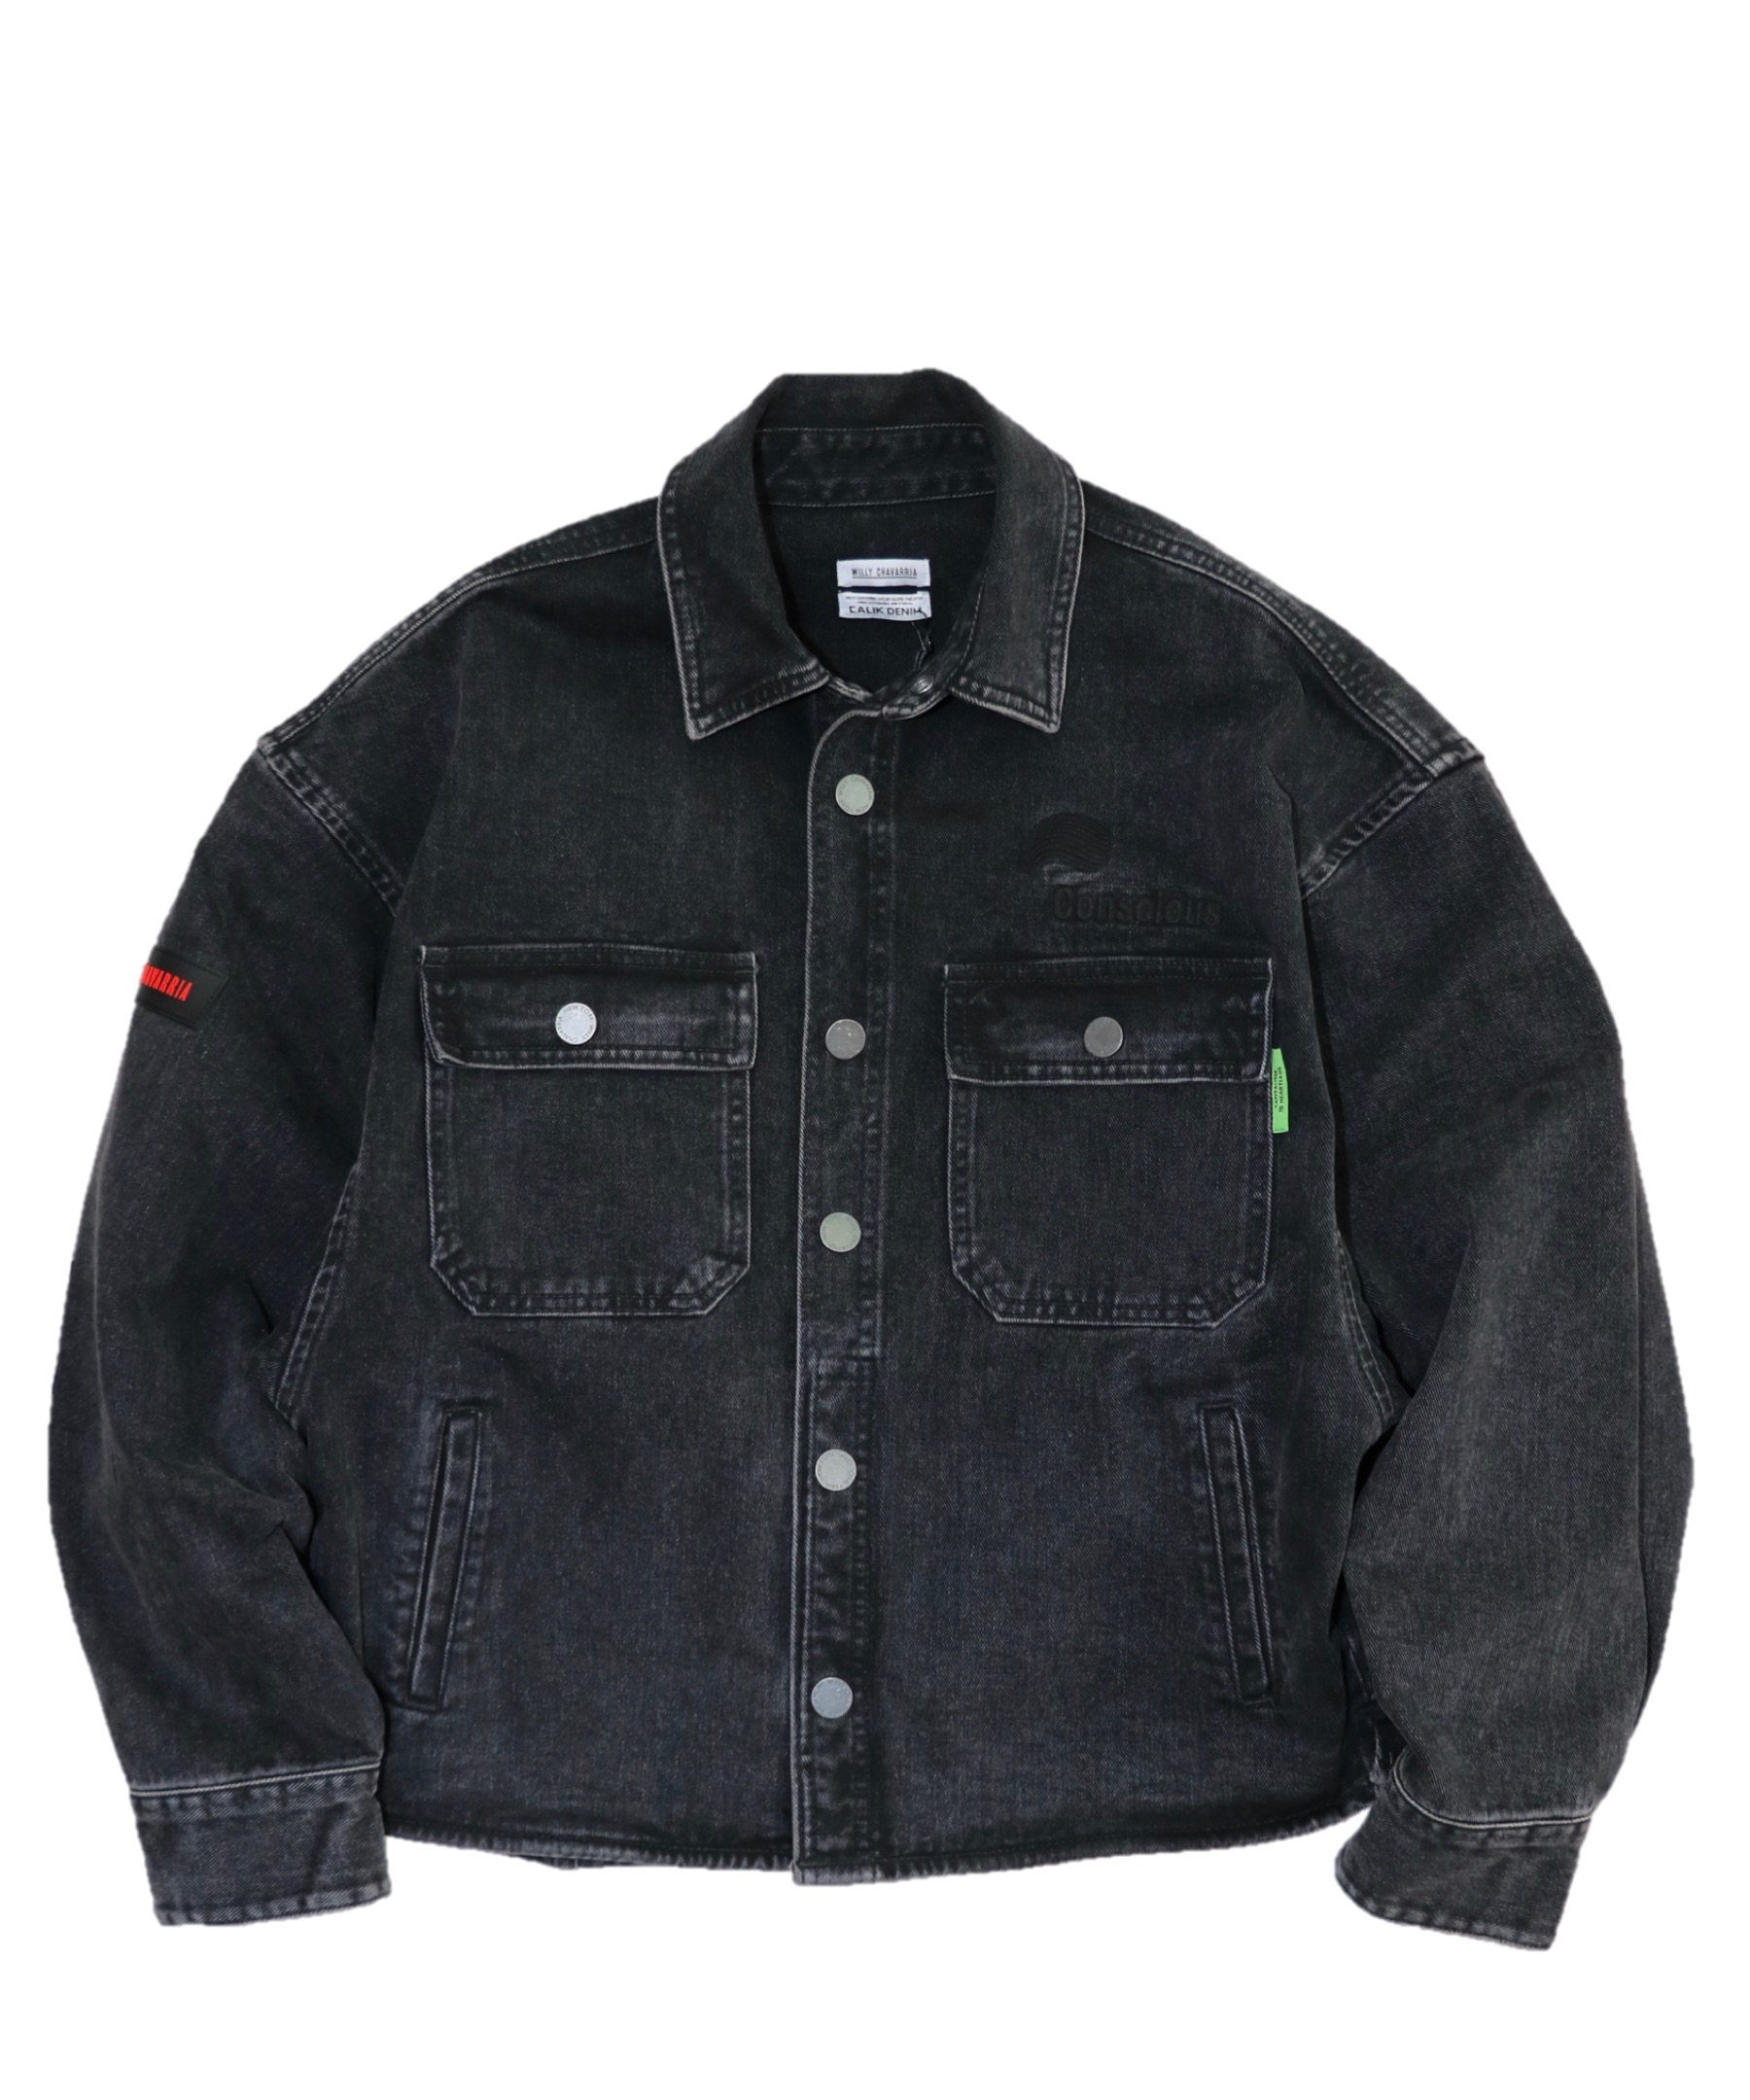 WILLY CHAVARRIA / DIRTY WILLY WORK JACKET. – C.E.L.STORE NOTE